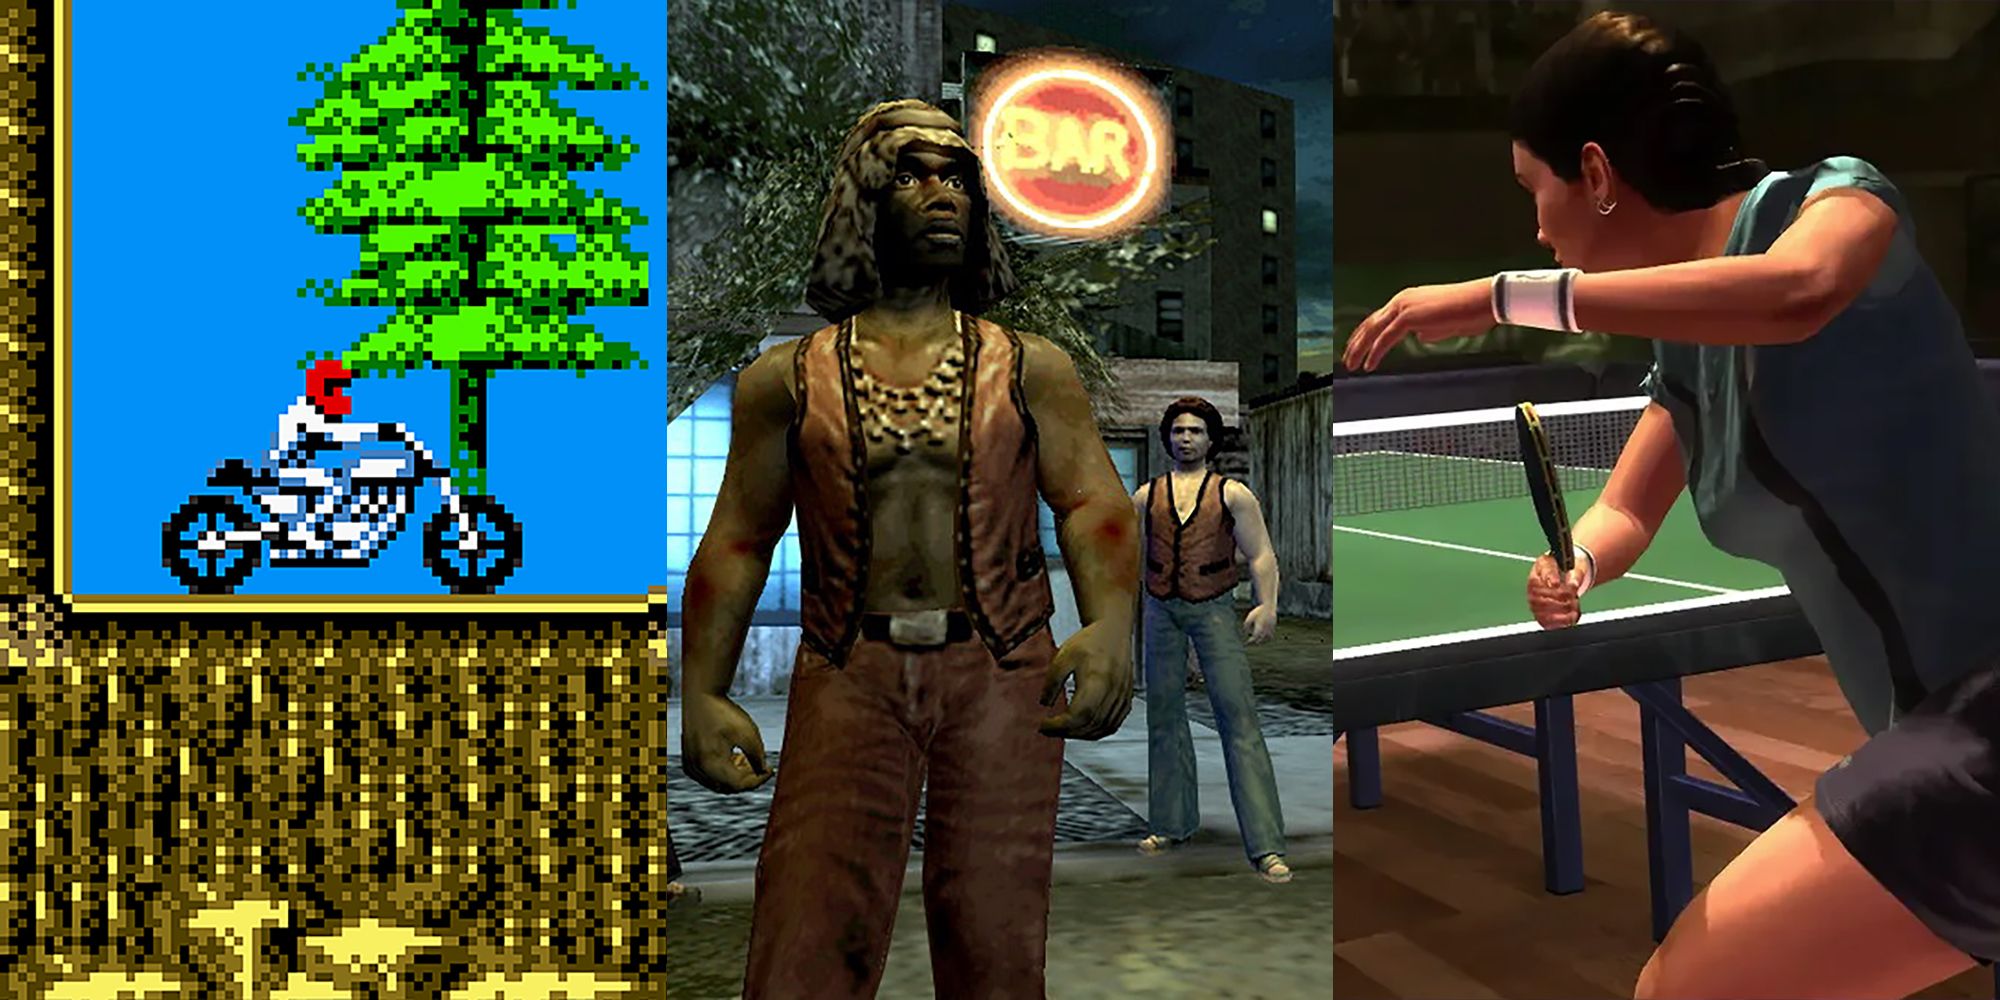 OC] Video Games Published and/or Developed by Rockstar Games since